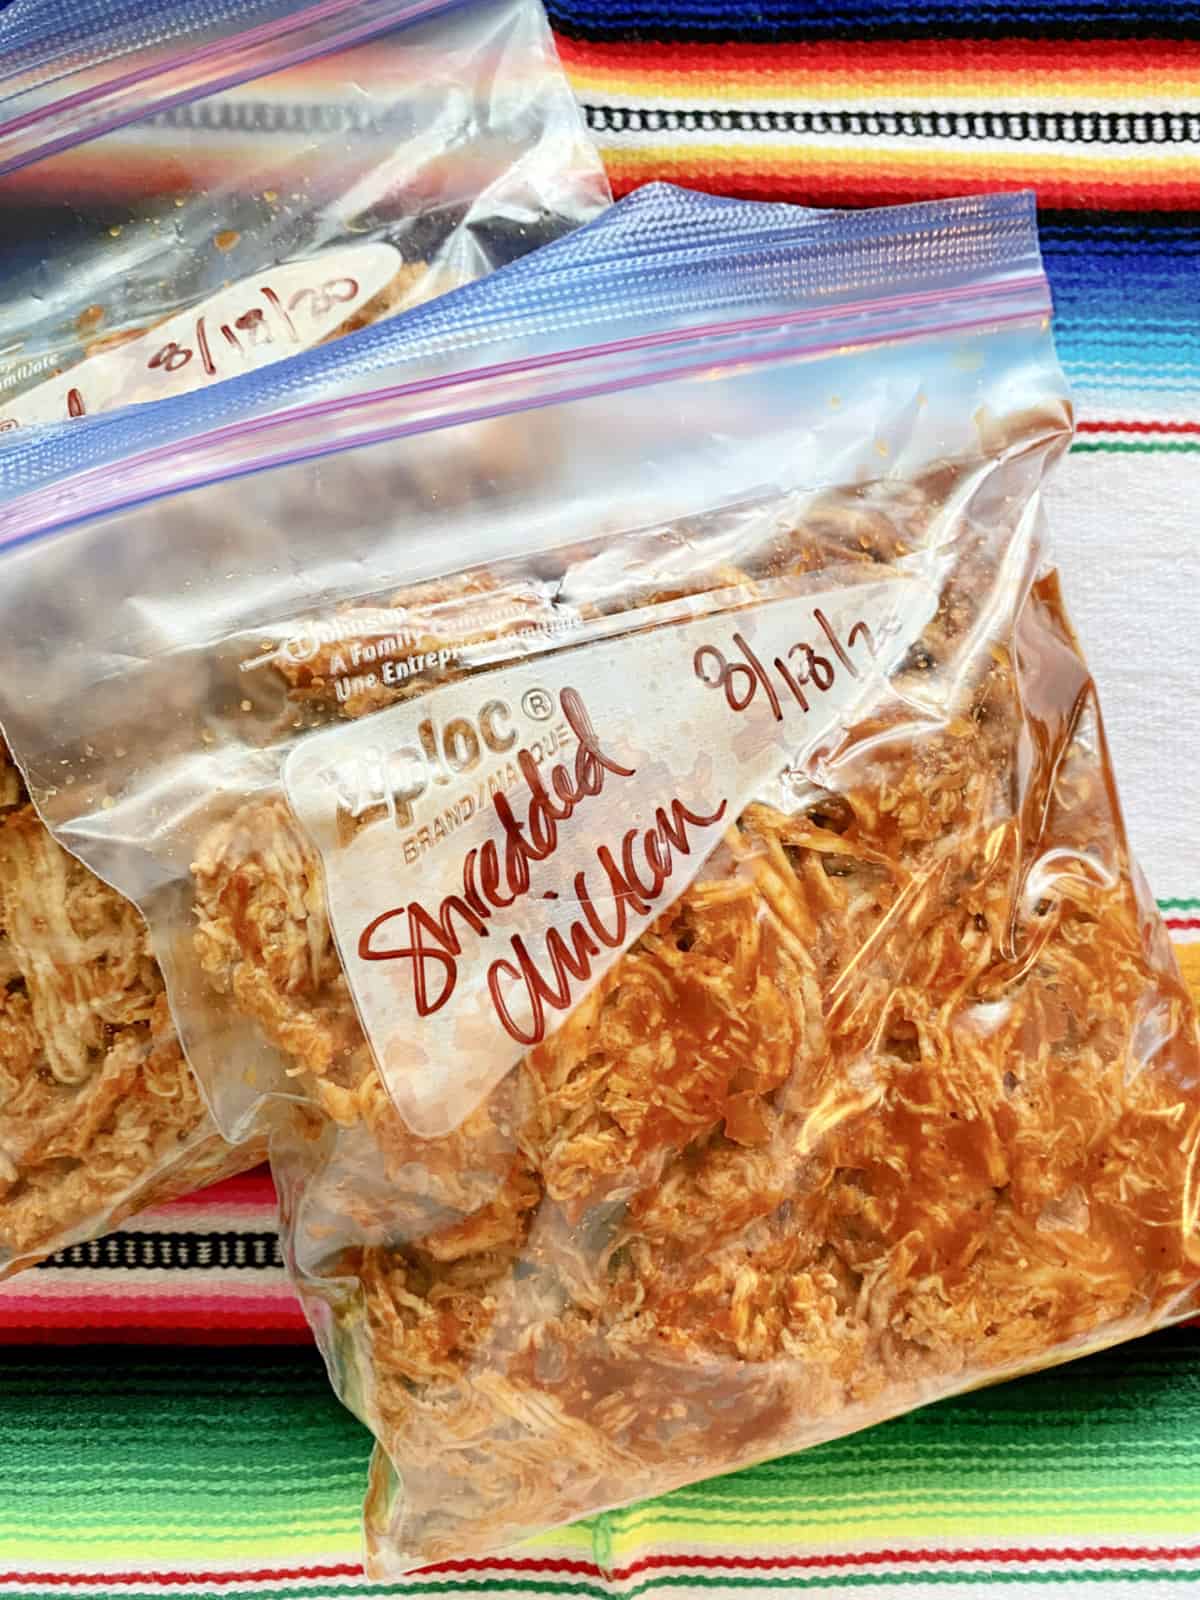 Two quart size bags labeled and filled with shredded chicken.